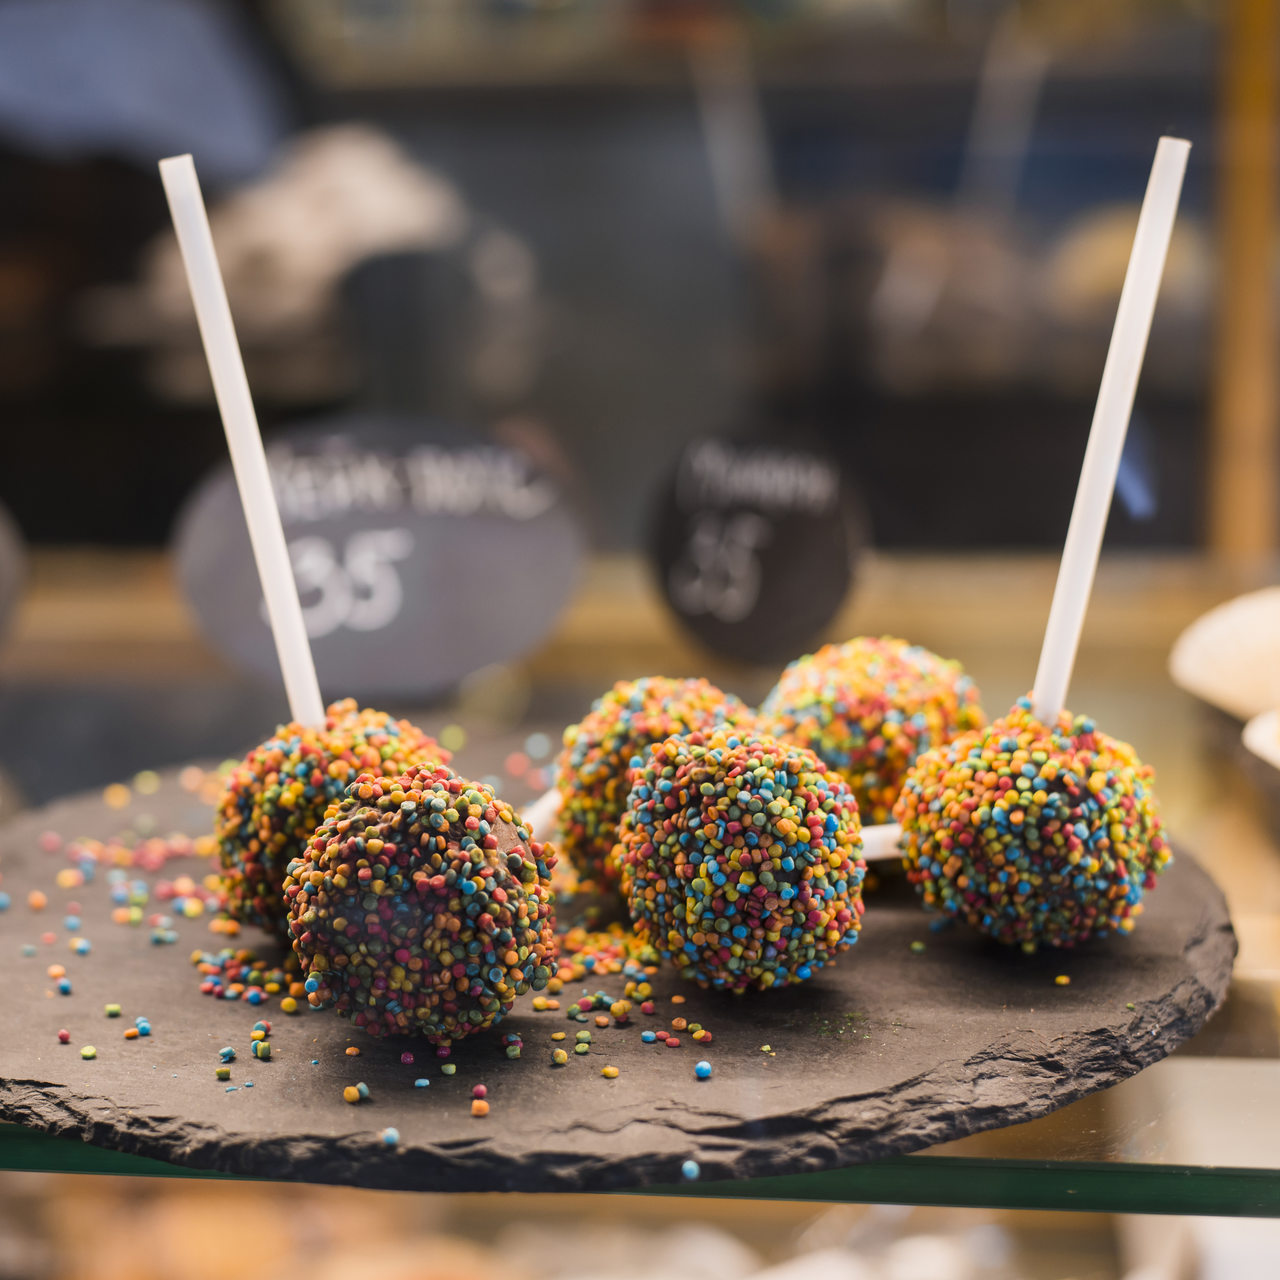 festive-chocolate-cake-pops-with-candy-sprinkles-displayed-coffee-shop_easy-resize.com.jpg